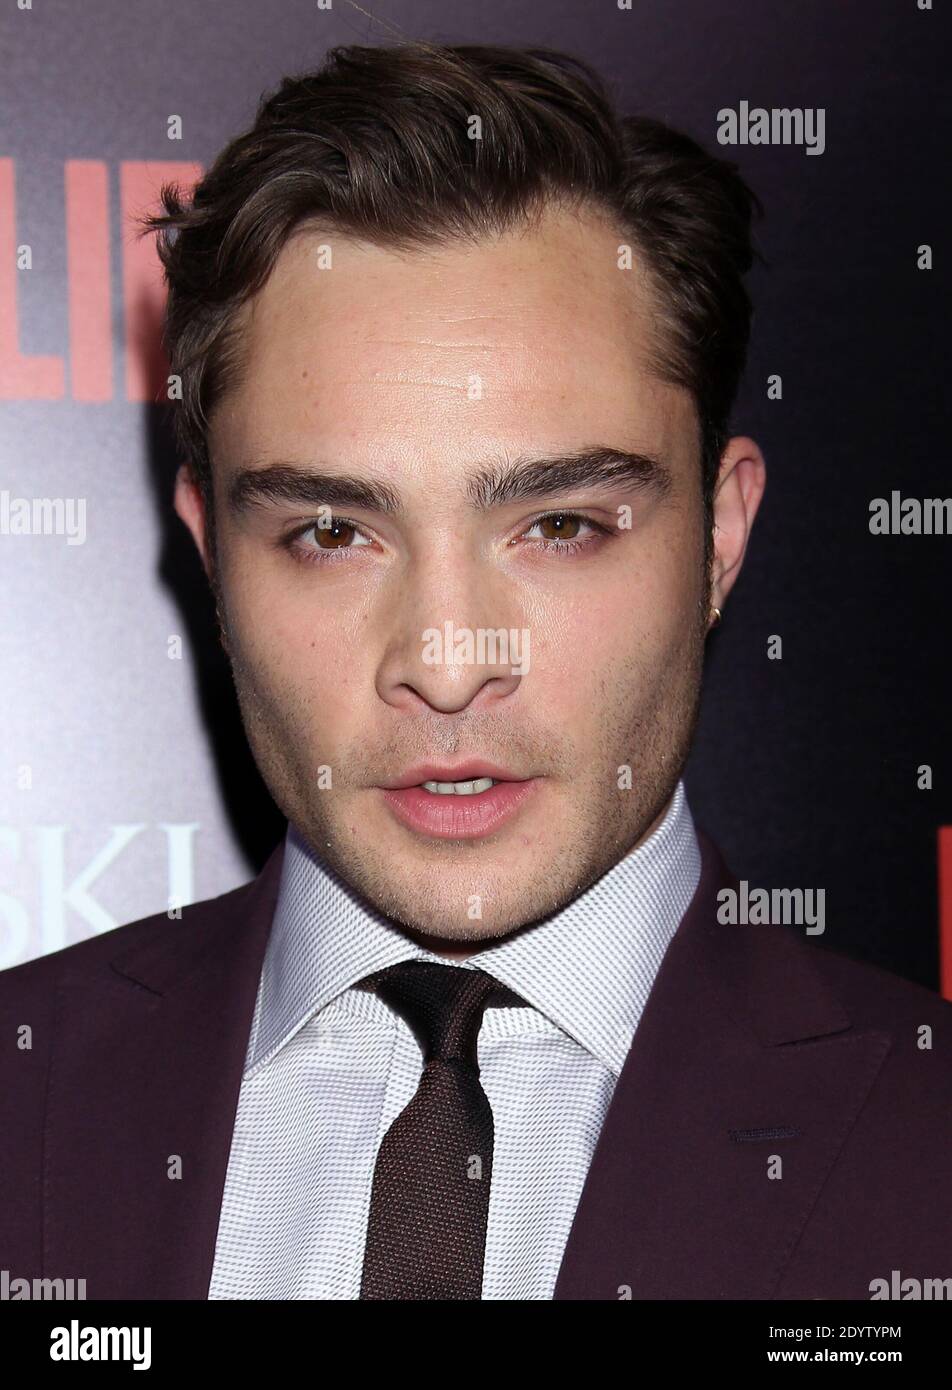 Ed Westwick, Relativity's film premiere for Romeo & Juliet at the Arclight Theatre in Hollywood, Los Angeles, CA, USA. September 24, 2013 (Ed Westwick) Photo by Baxter/ABACAPRESS.COM Stock Photo